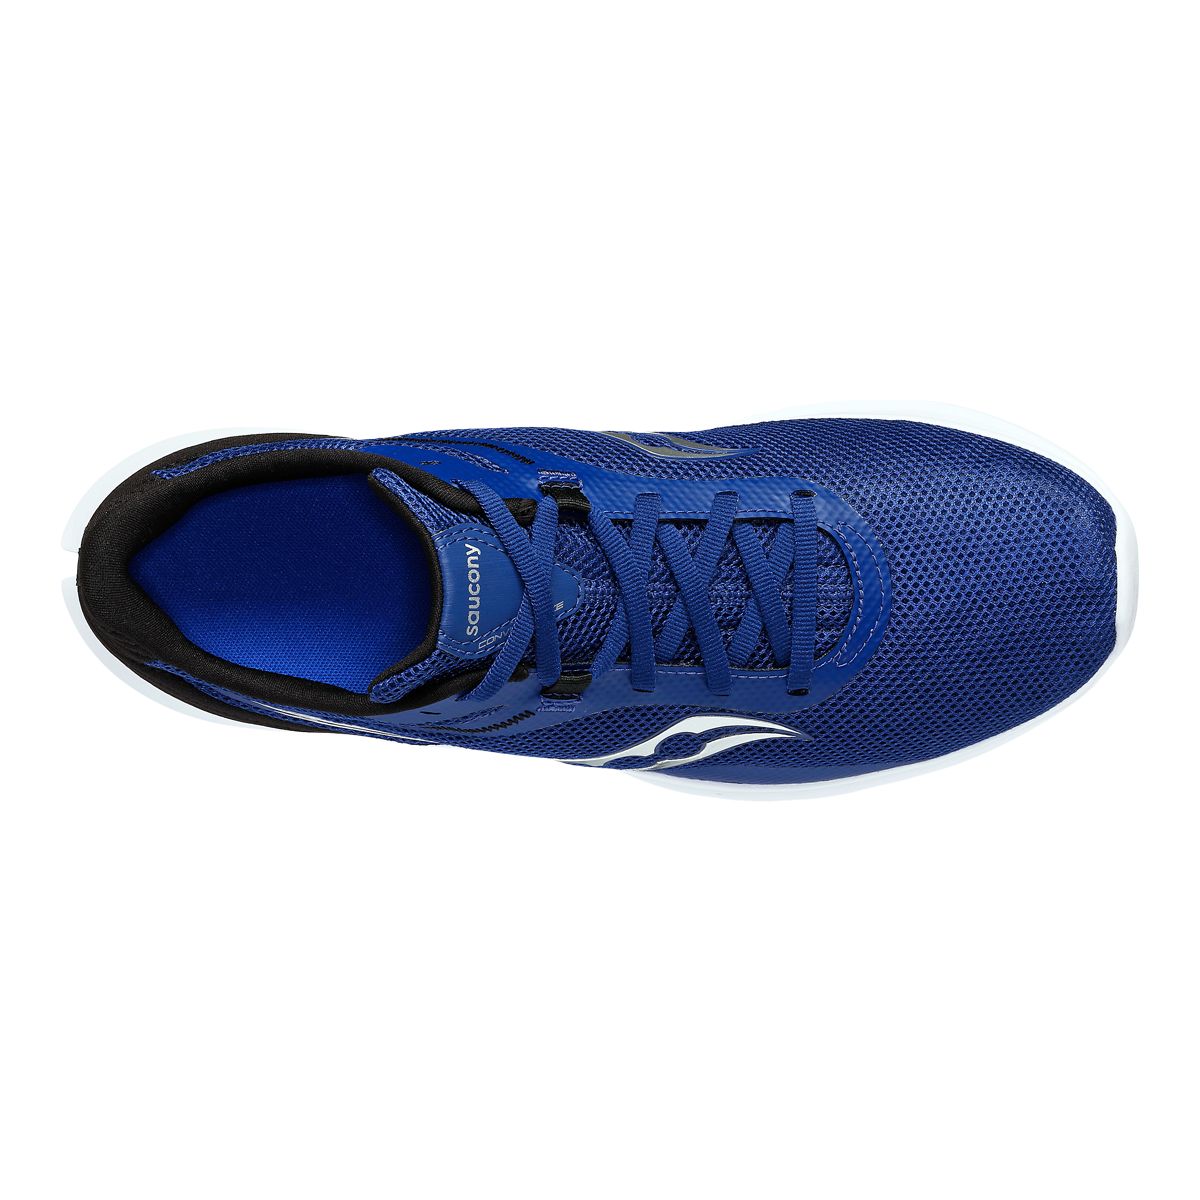 Saucony Men's Convergence Running Shoes